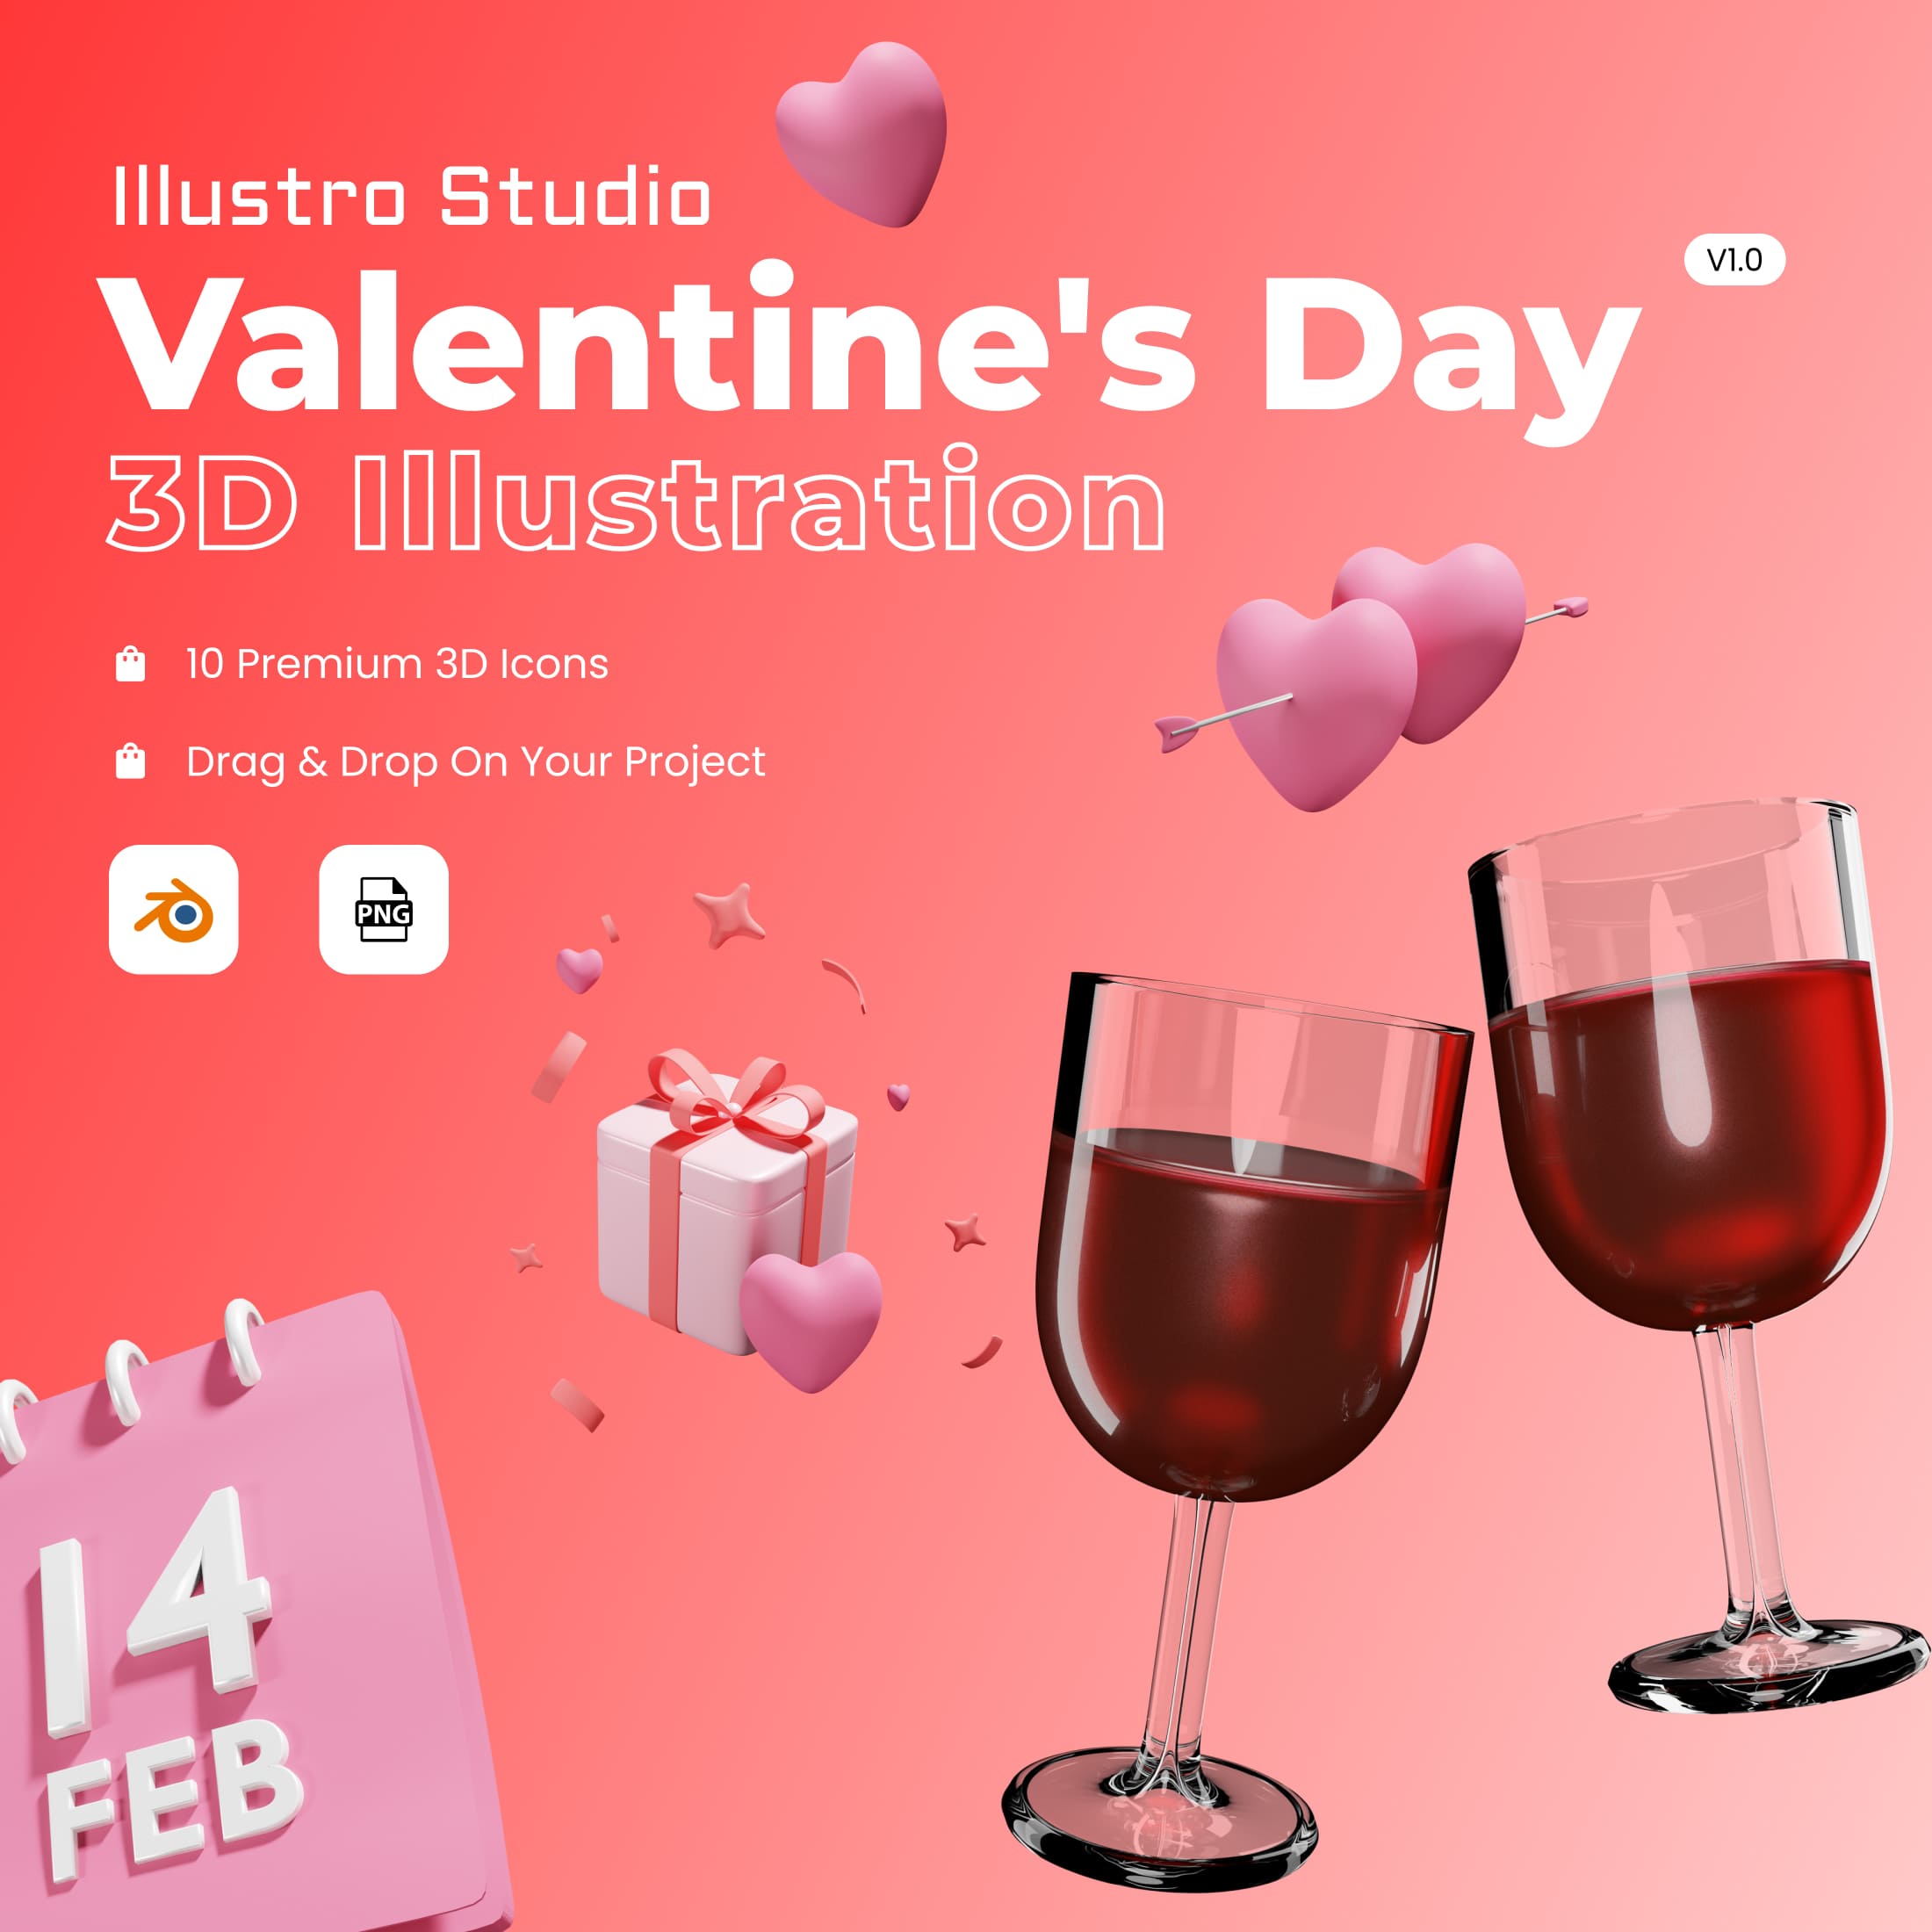 Valentine's day 3D Illustration - only $12 cover image.